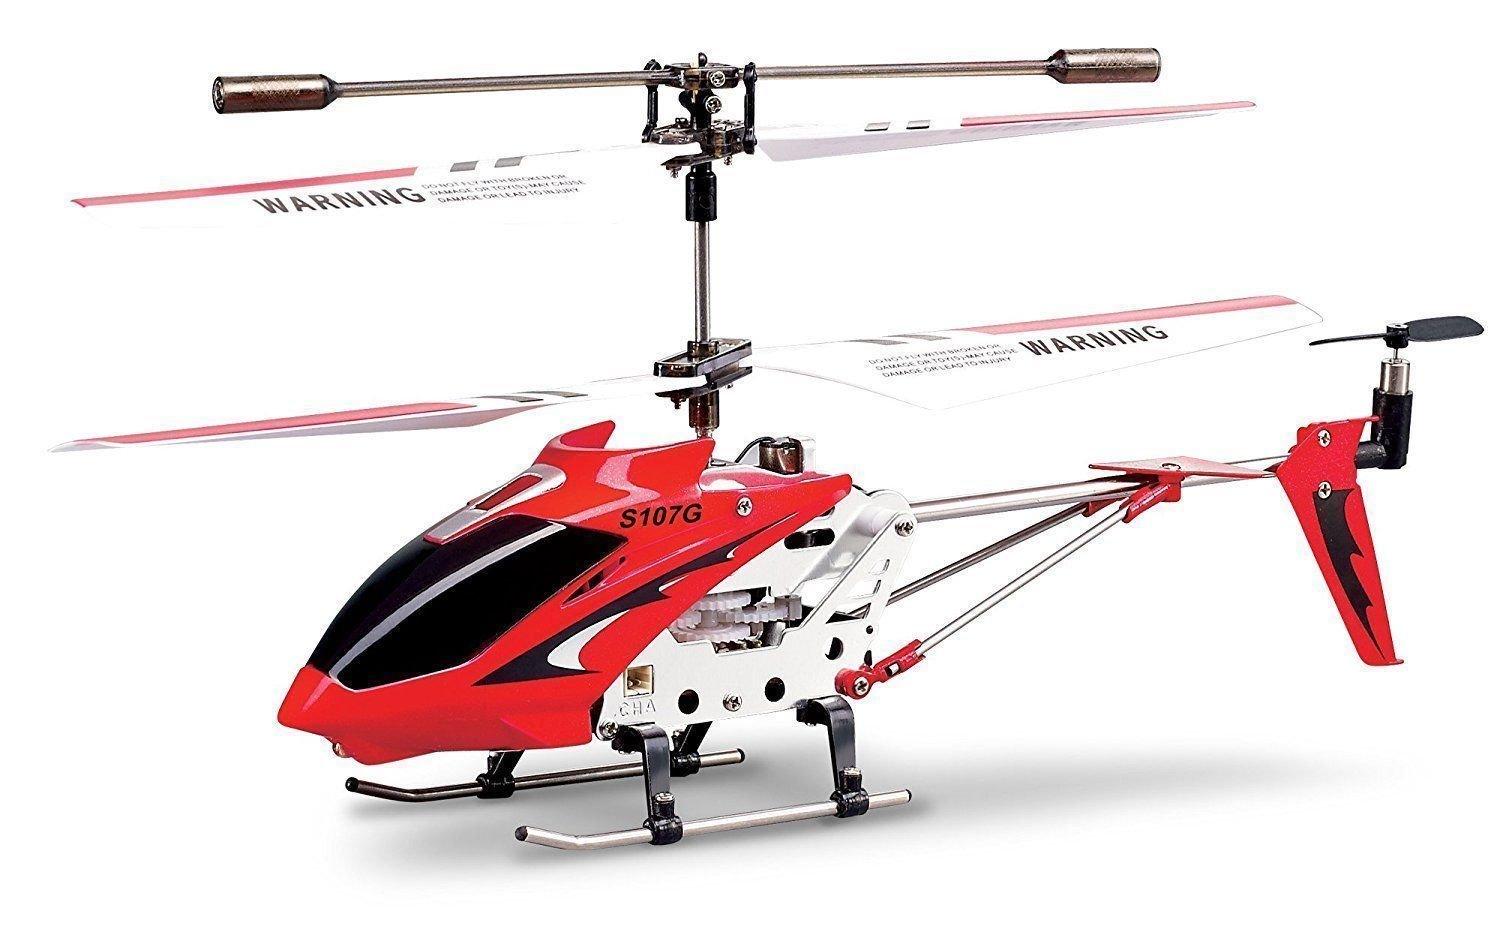 Syma S107G 3 Channel Rc Helicopter With Gyro Blue: Affordable and Versatile 